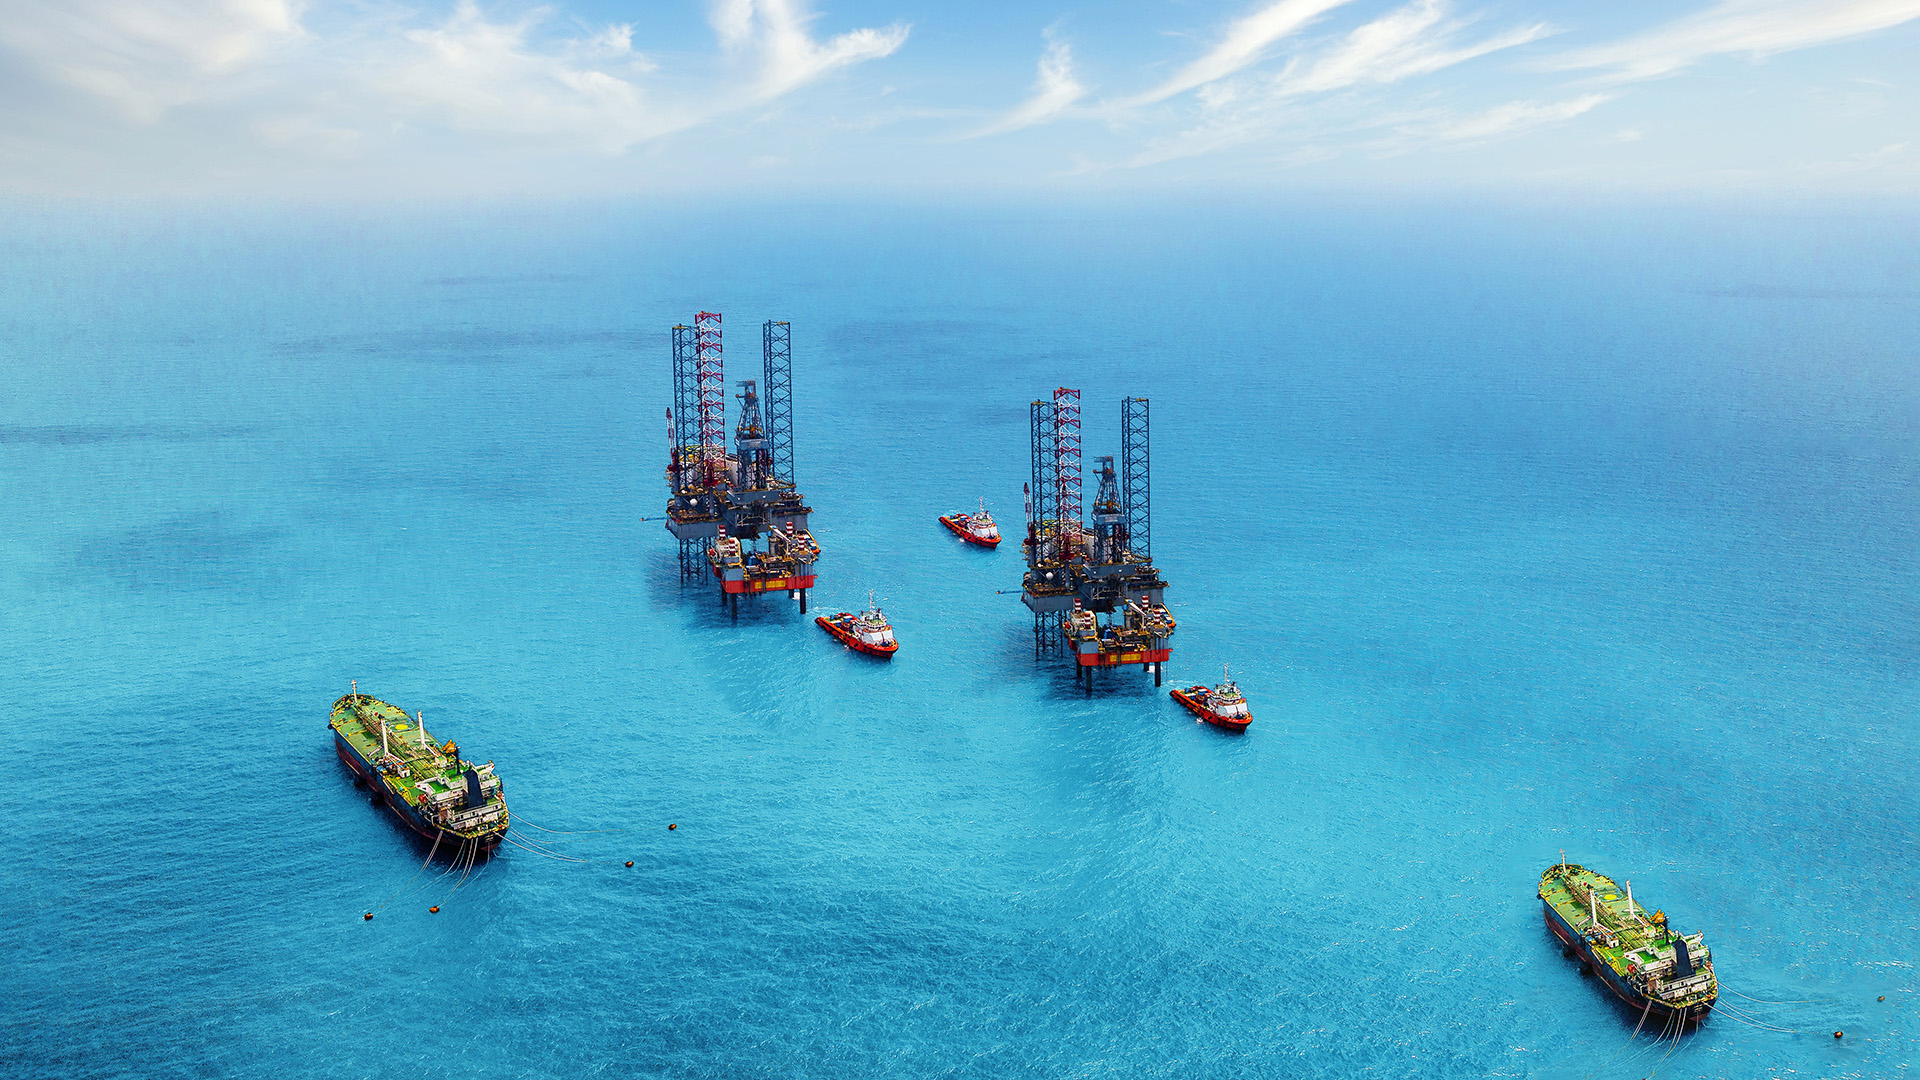 Two offshore oil rigs sit side by side, with boats nearby in a bright blue sea.